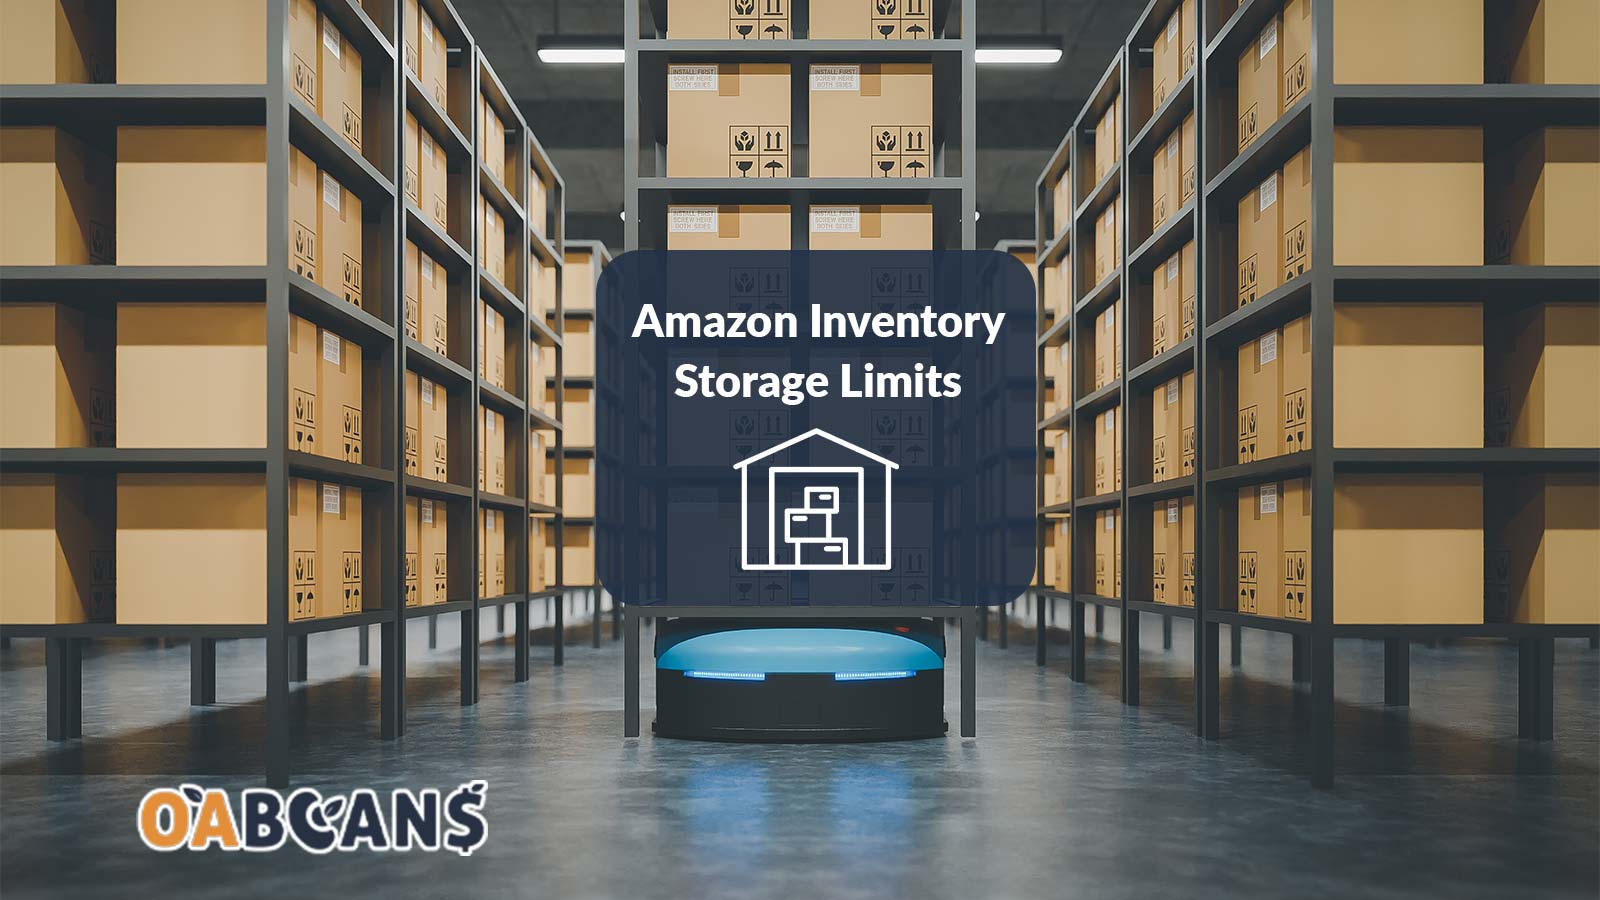 Amazon storage limits are based on volume and measured in cubic feet and represent the total amount of inventory you can store in Amazon fulfillment centers.